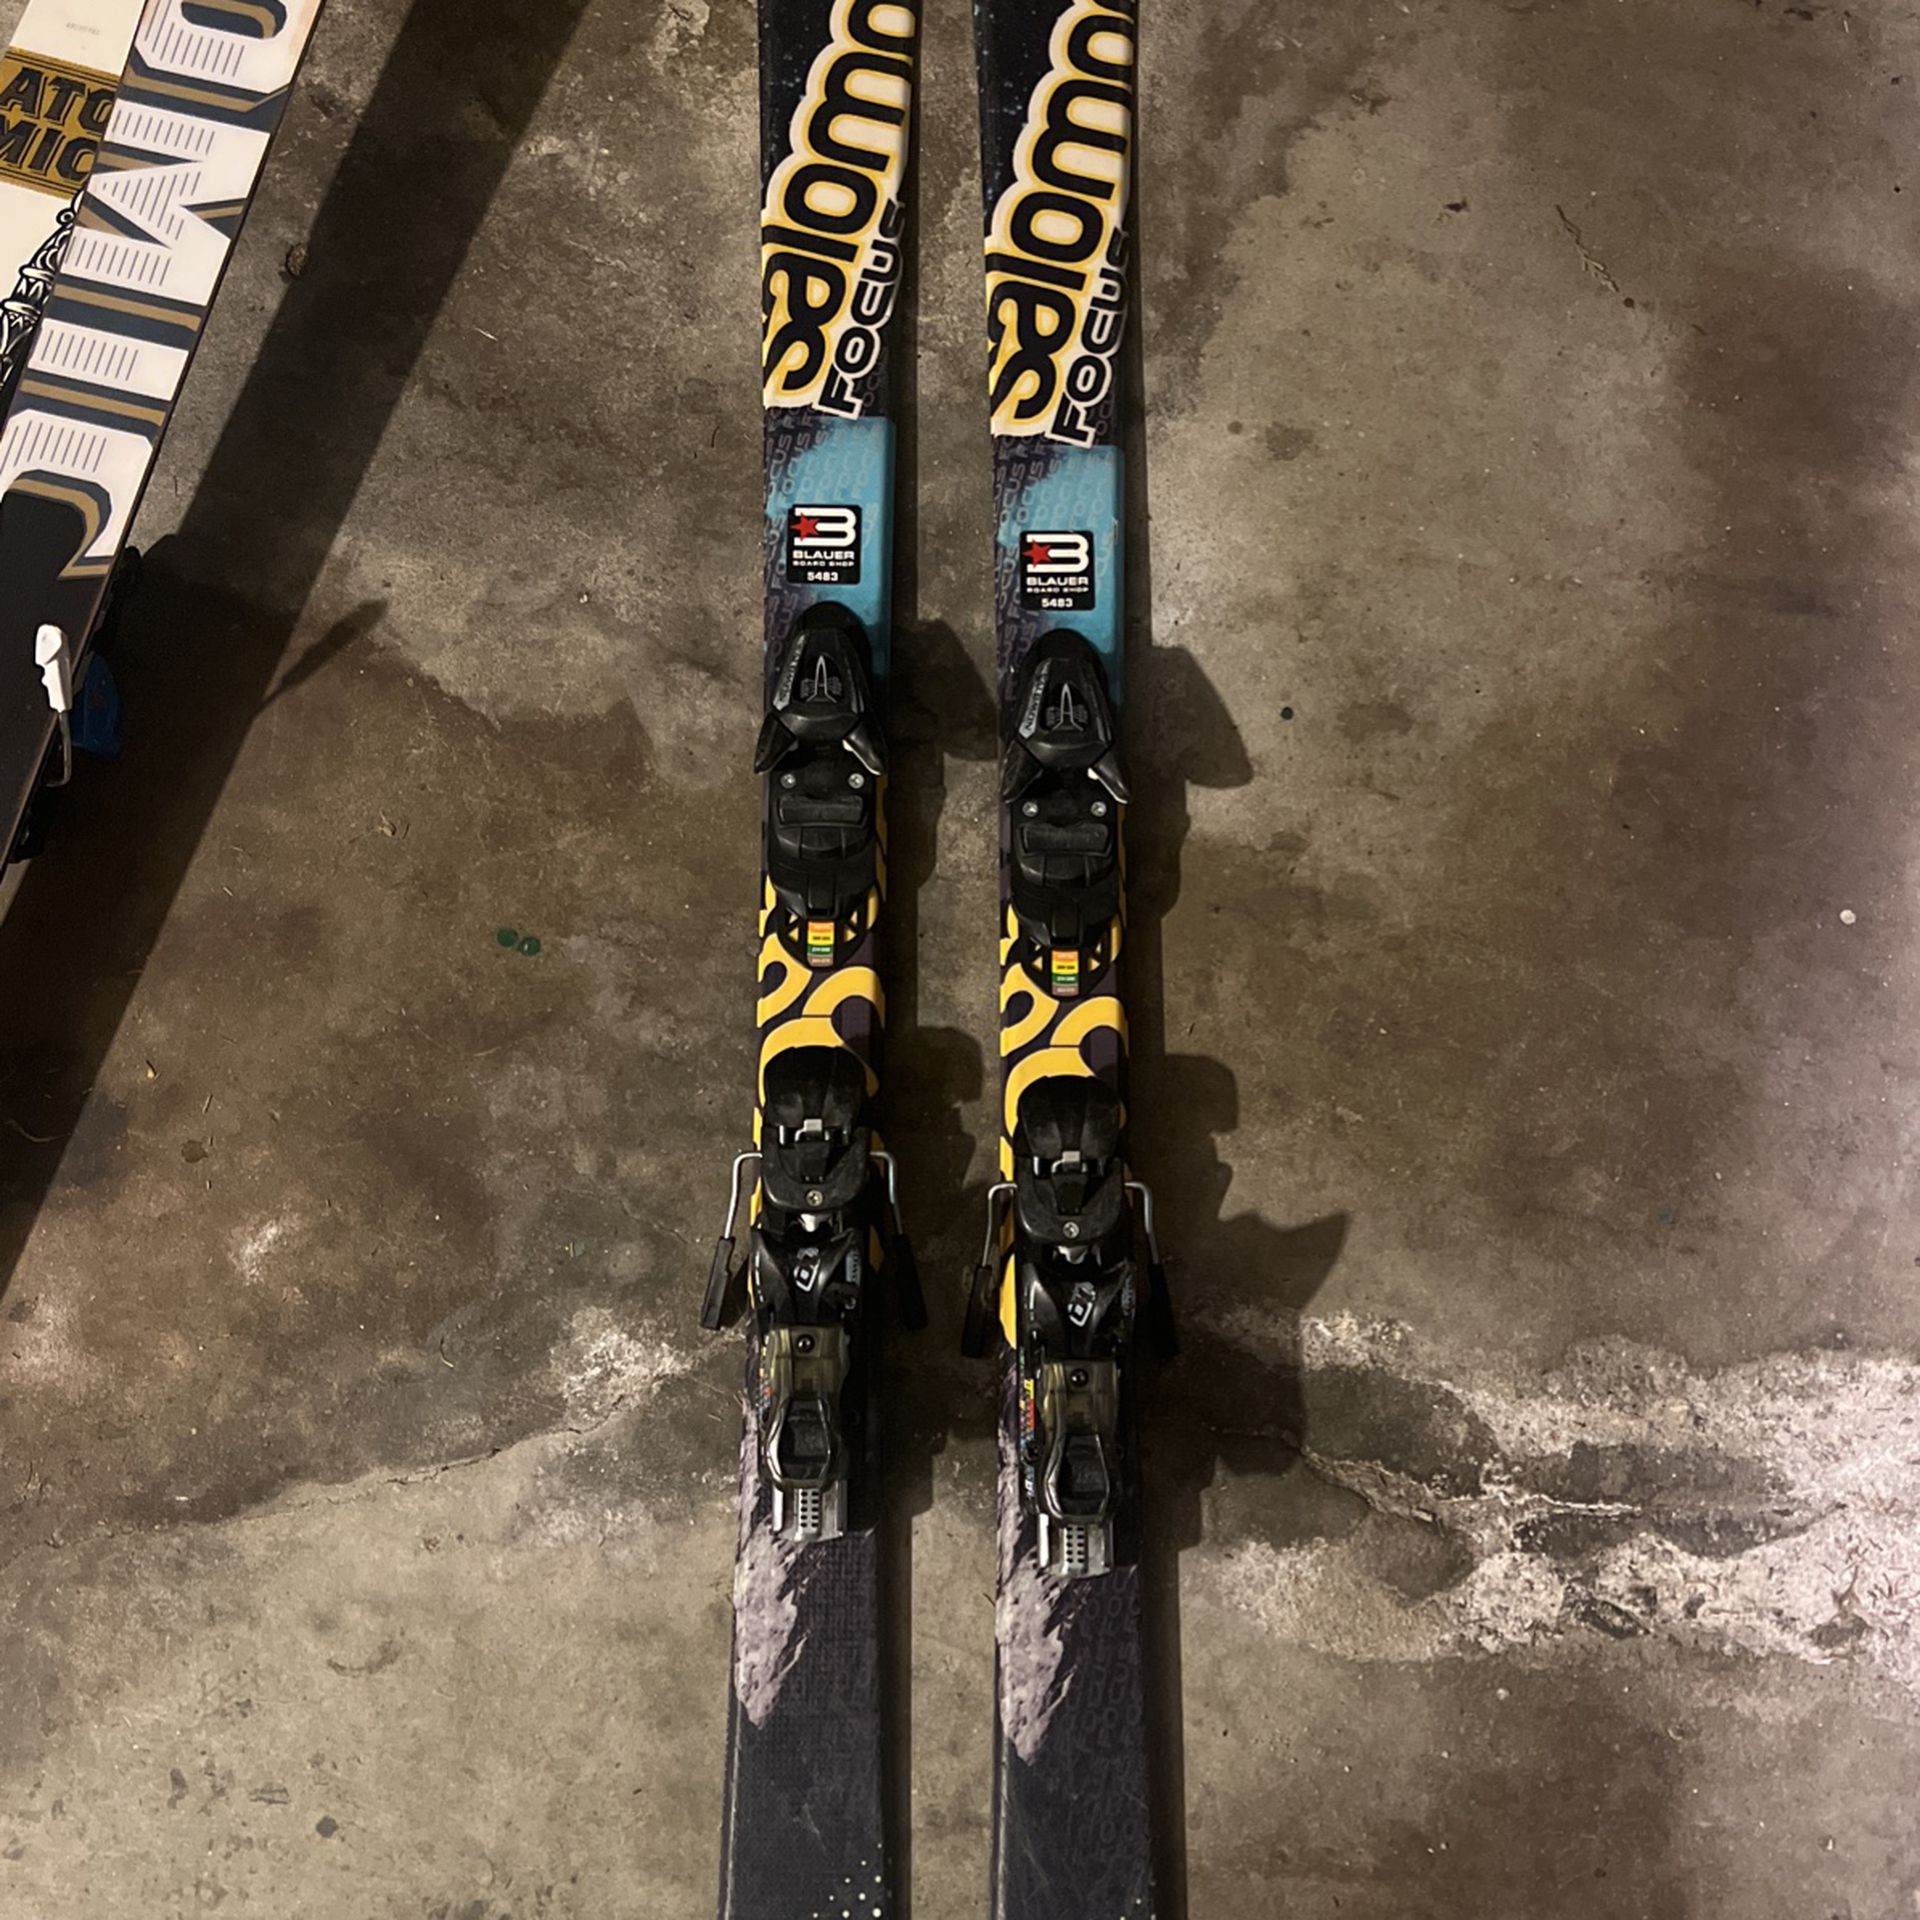 SALOMON X-WING FOCUS SKIS (Used - Great Condition)